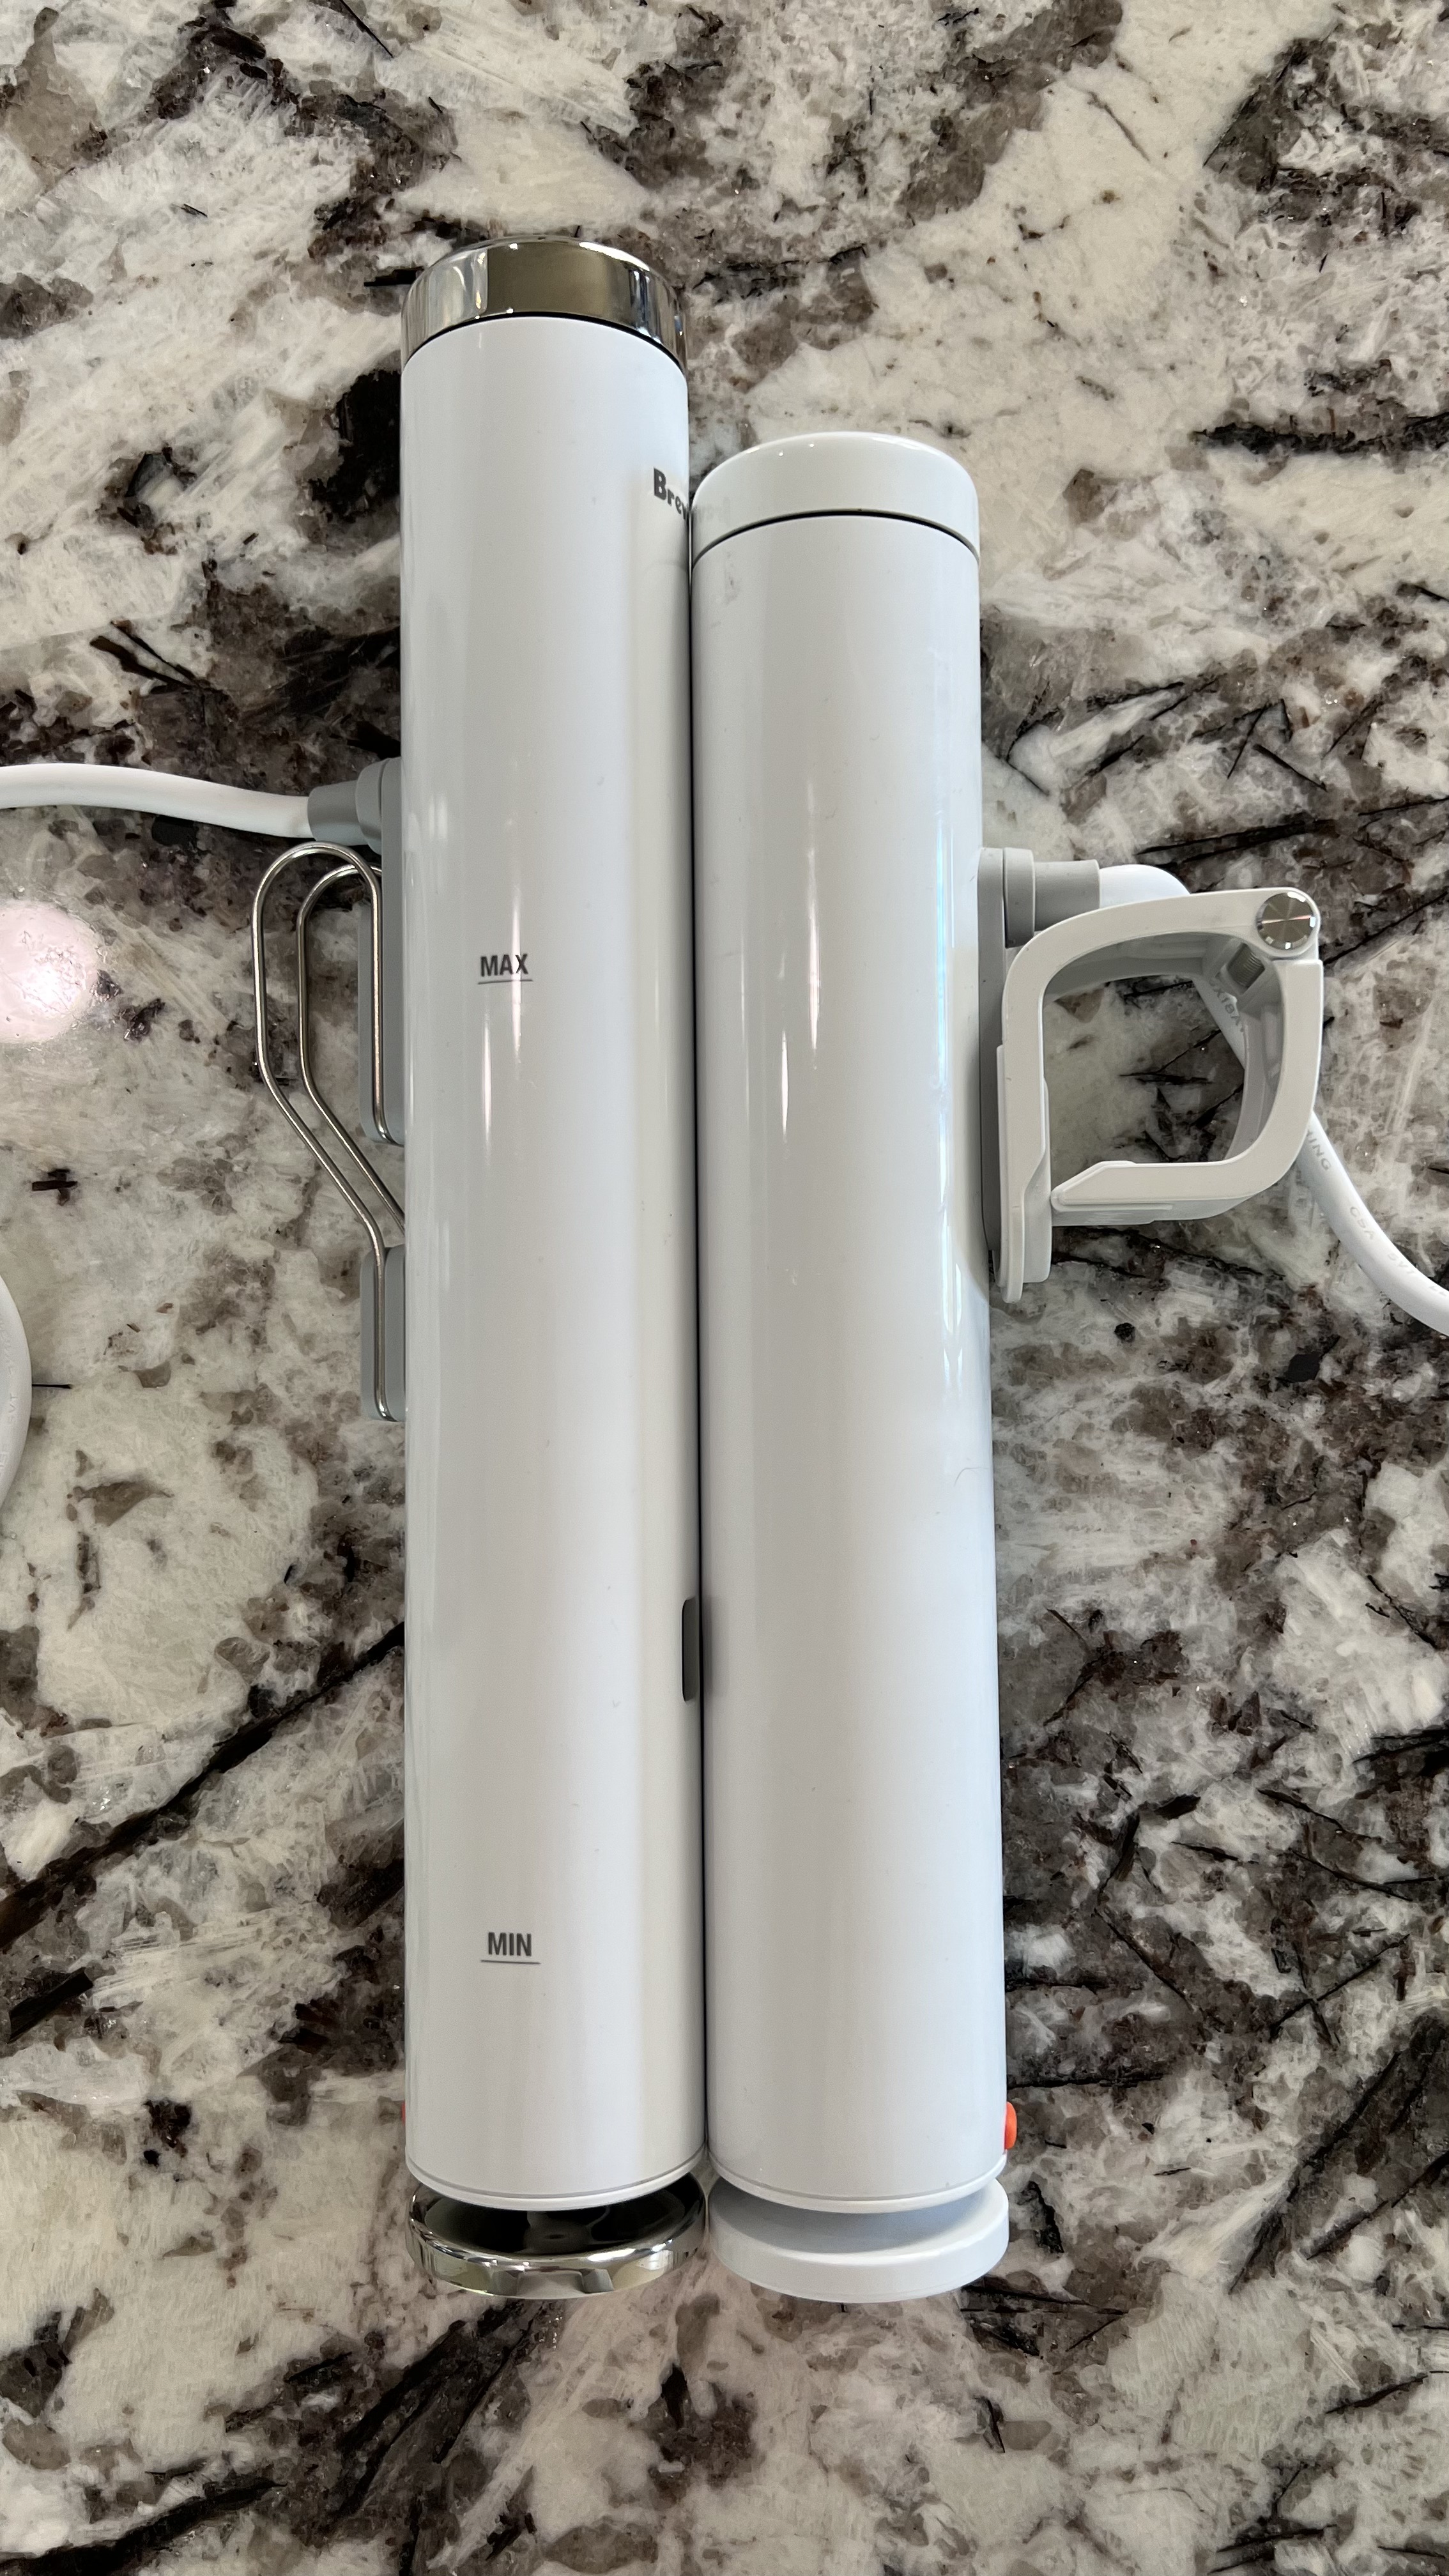 Breville Joule Turbo Sous Vide Review (Tested, Photos)